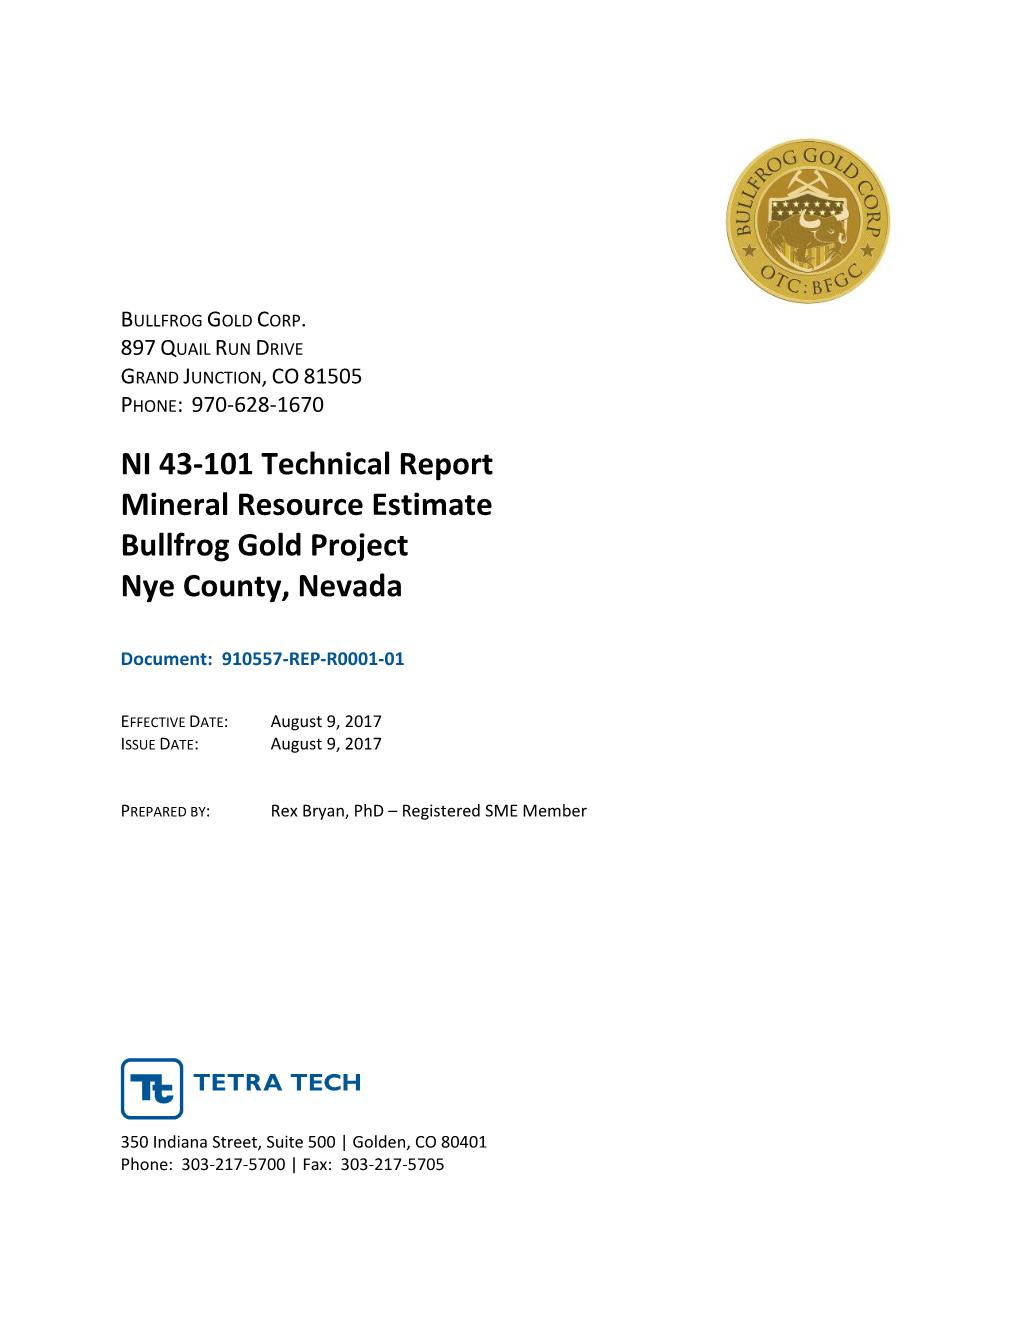 NI 43-101 Technical Report Mineral Resource Estimate Bullfrog Gold Project Nye County, Nevada